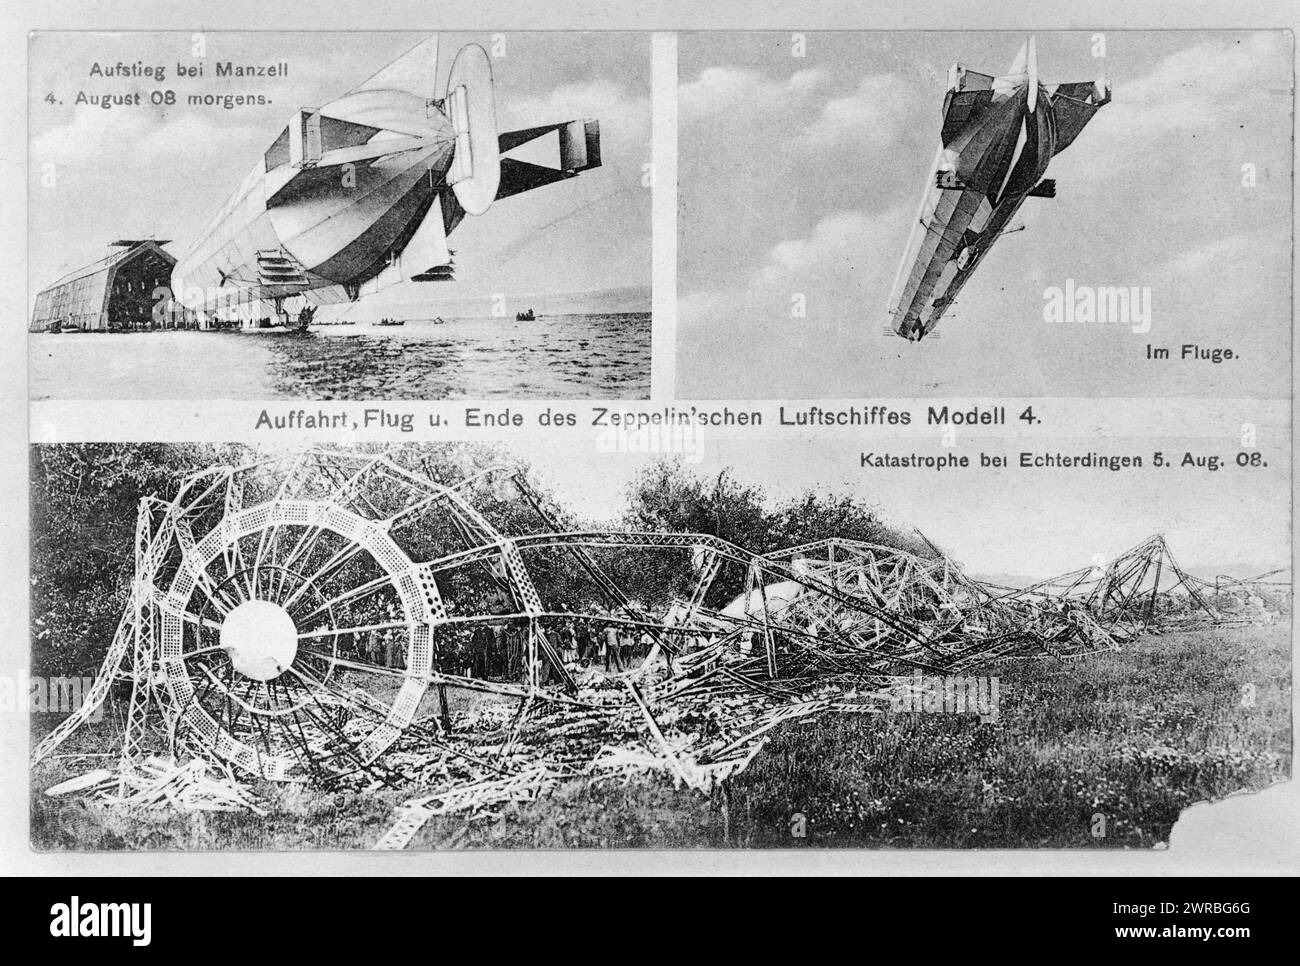 Auffahrt, Flug u. Ende des Zeppelin'schen Luftschiffes Modell 4, Three illustrations showing the fourth model zeppelin taking off at Manzell, on the morning of Aug. 4, and in flight; and wreck in Echterdingen, Germany., 1908., Airships, German, Germany, Echterdingen, 1900-1910, Photomechanical prints, 1900-1910., Photomechanical prints, 1900-1910, 1 photomechanical print Stock Photo